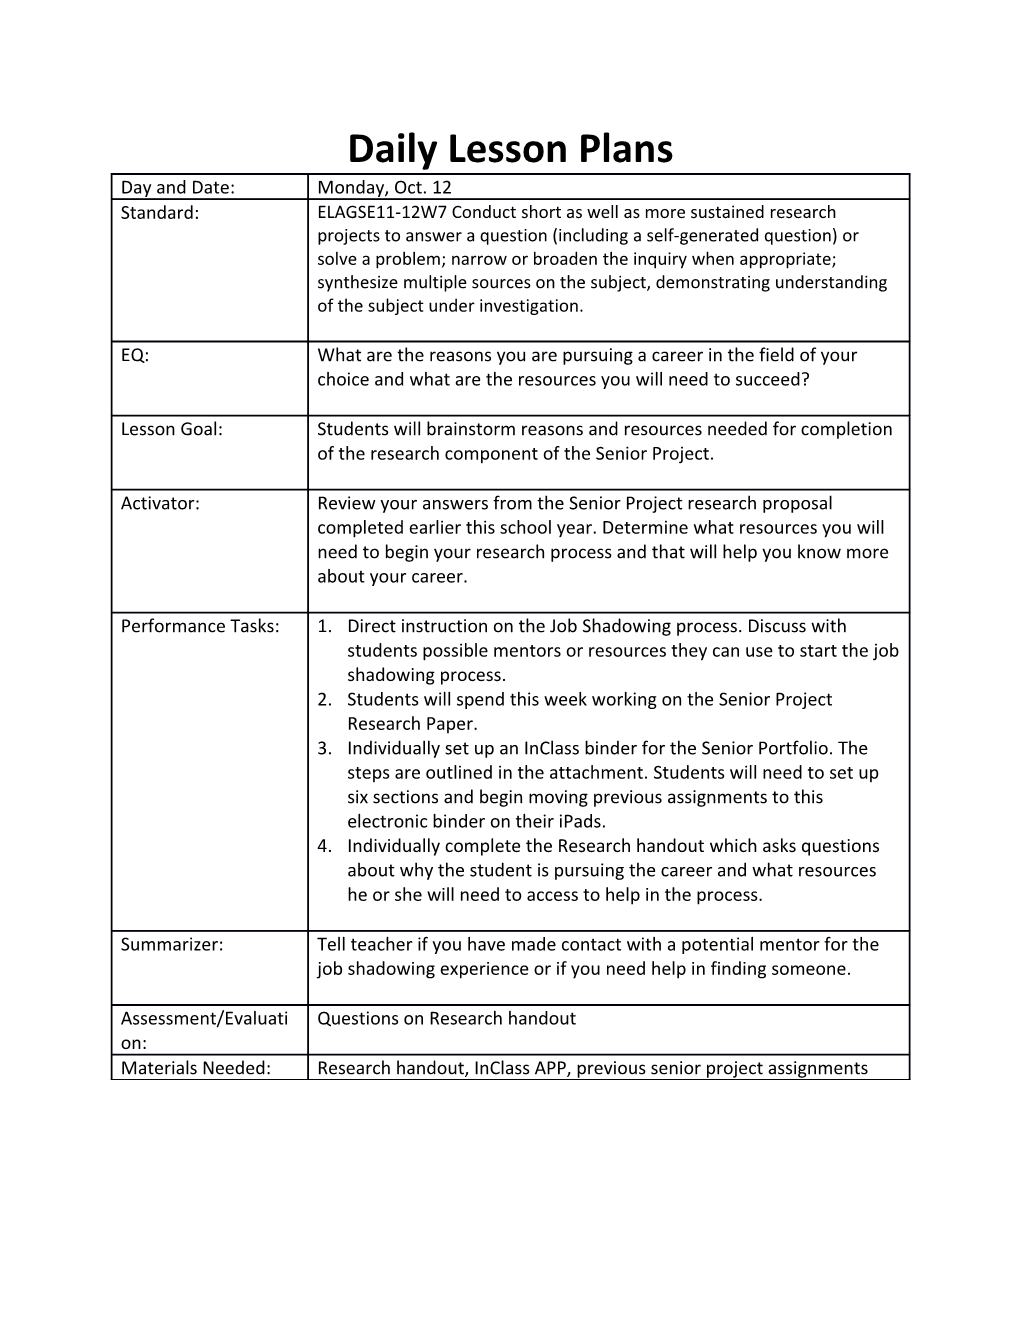 Daily Lesson Plans s3